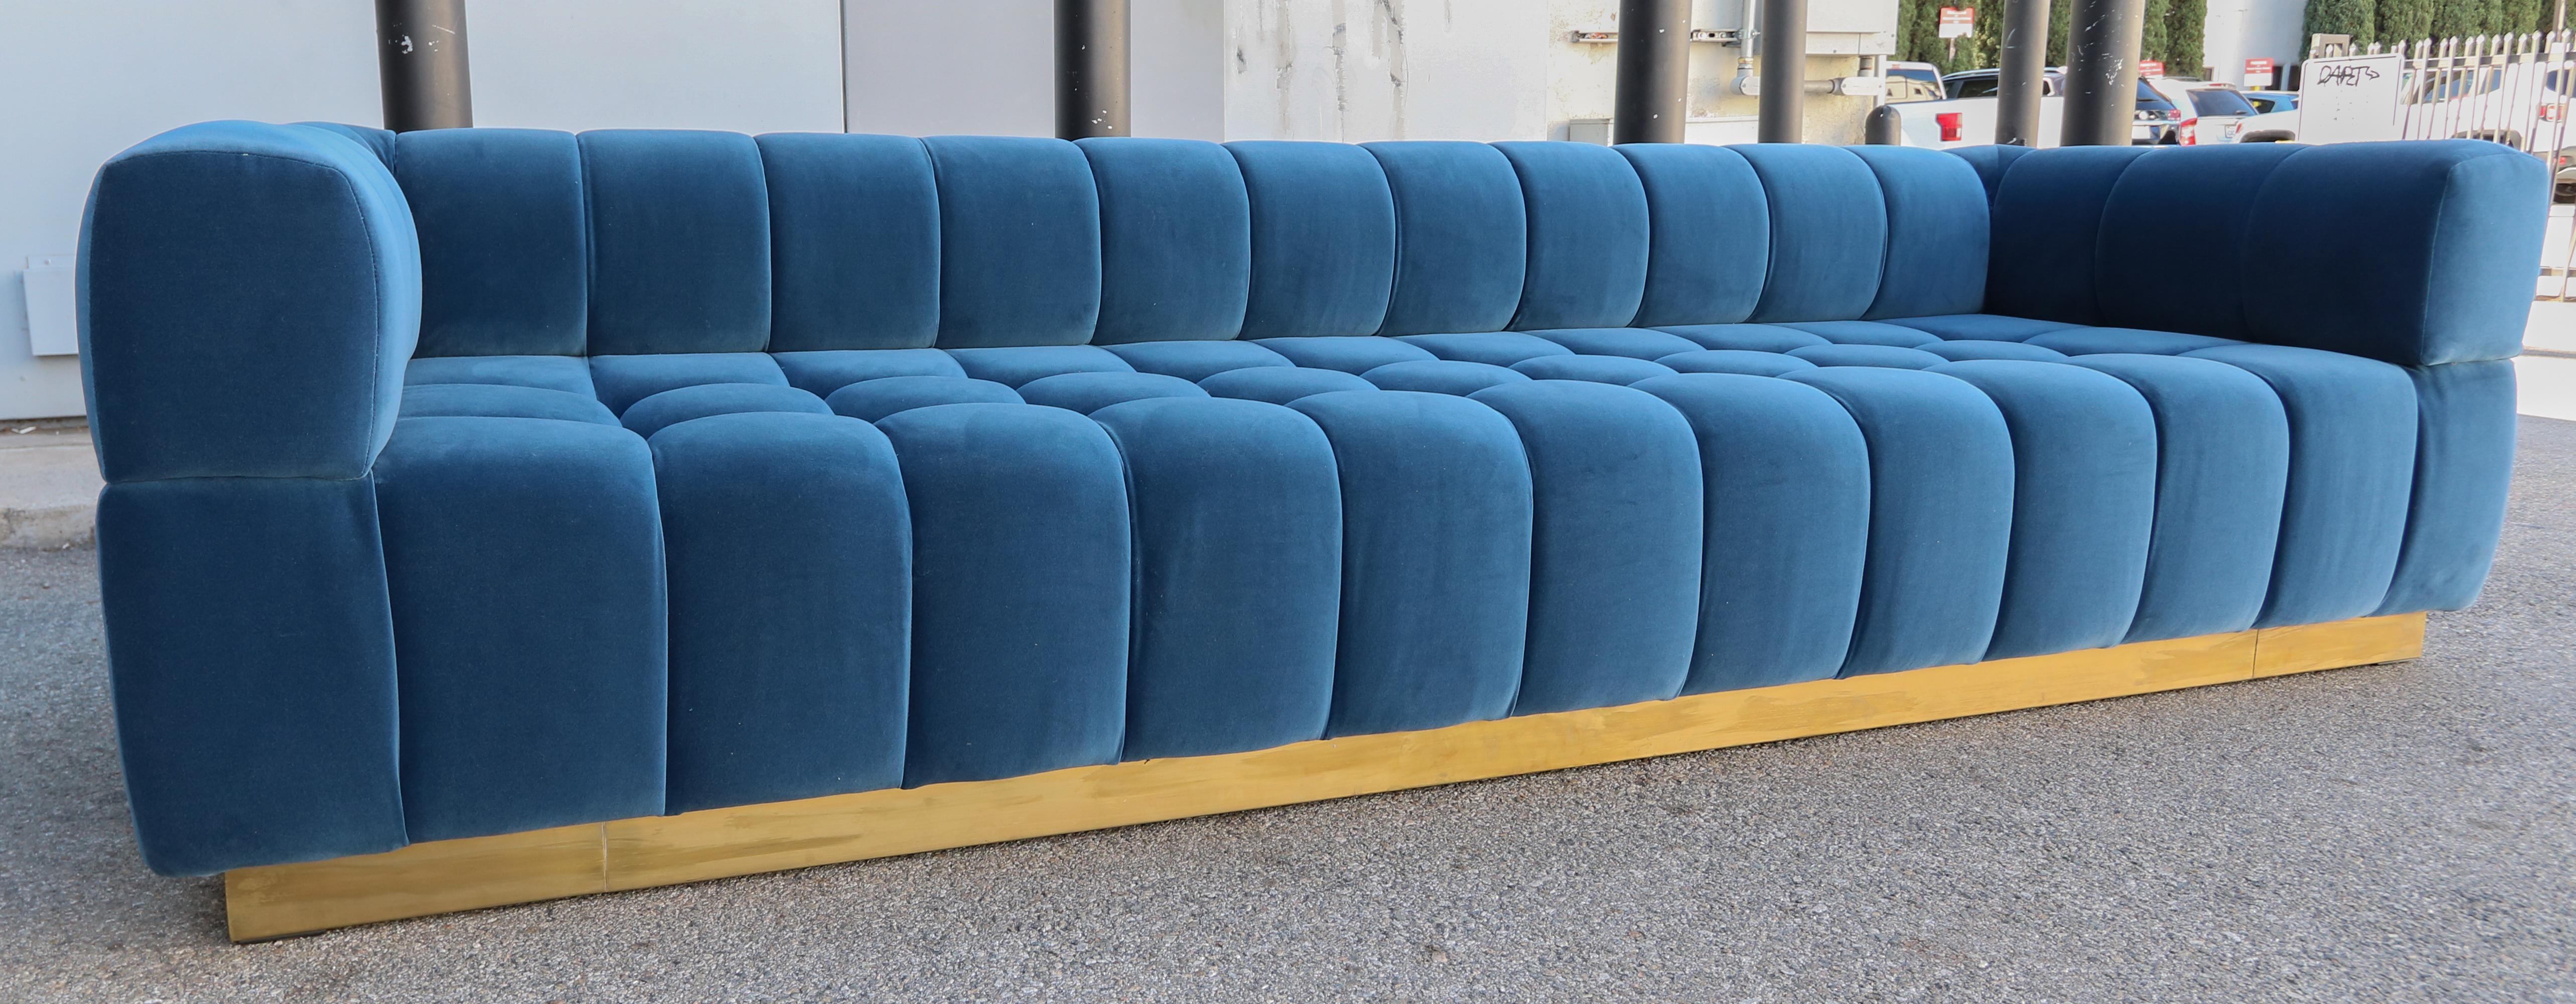 Custom Tufted Blue Velvet Sofa with Brass Base by Adesso Imports For Sale 3